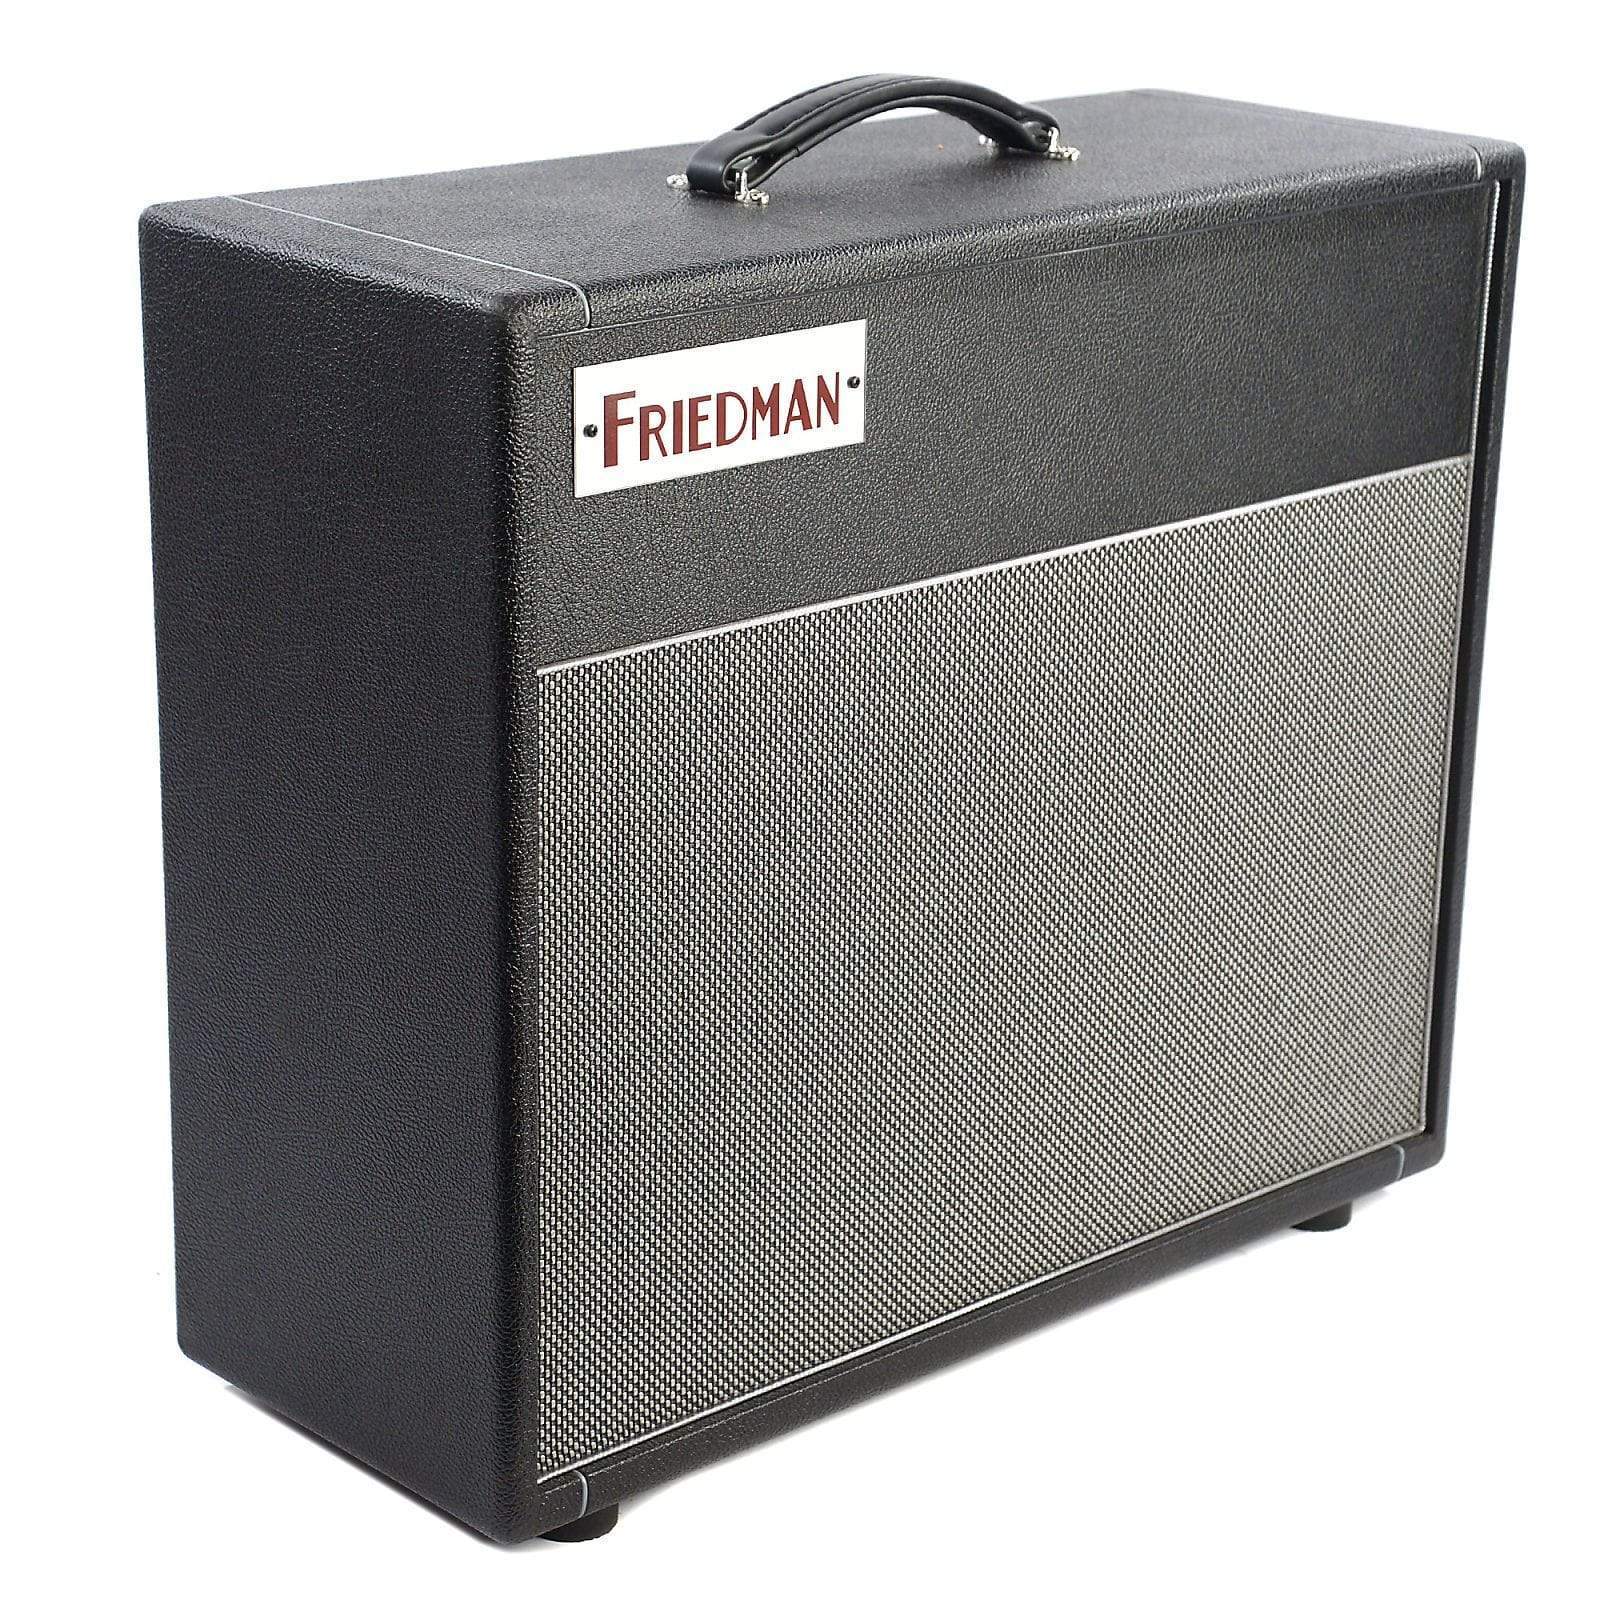 Friedman Dirty Shirley 1x12 Cabinet w/Celestion Creamback Amps / Guitar Cabinets